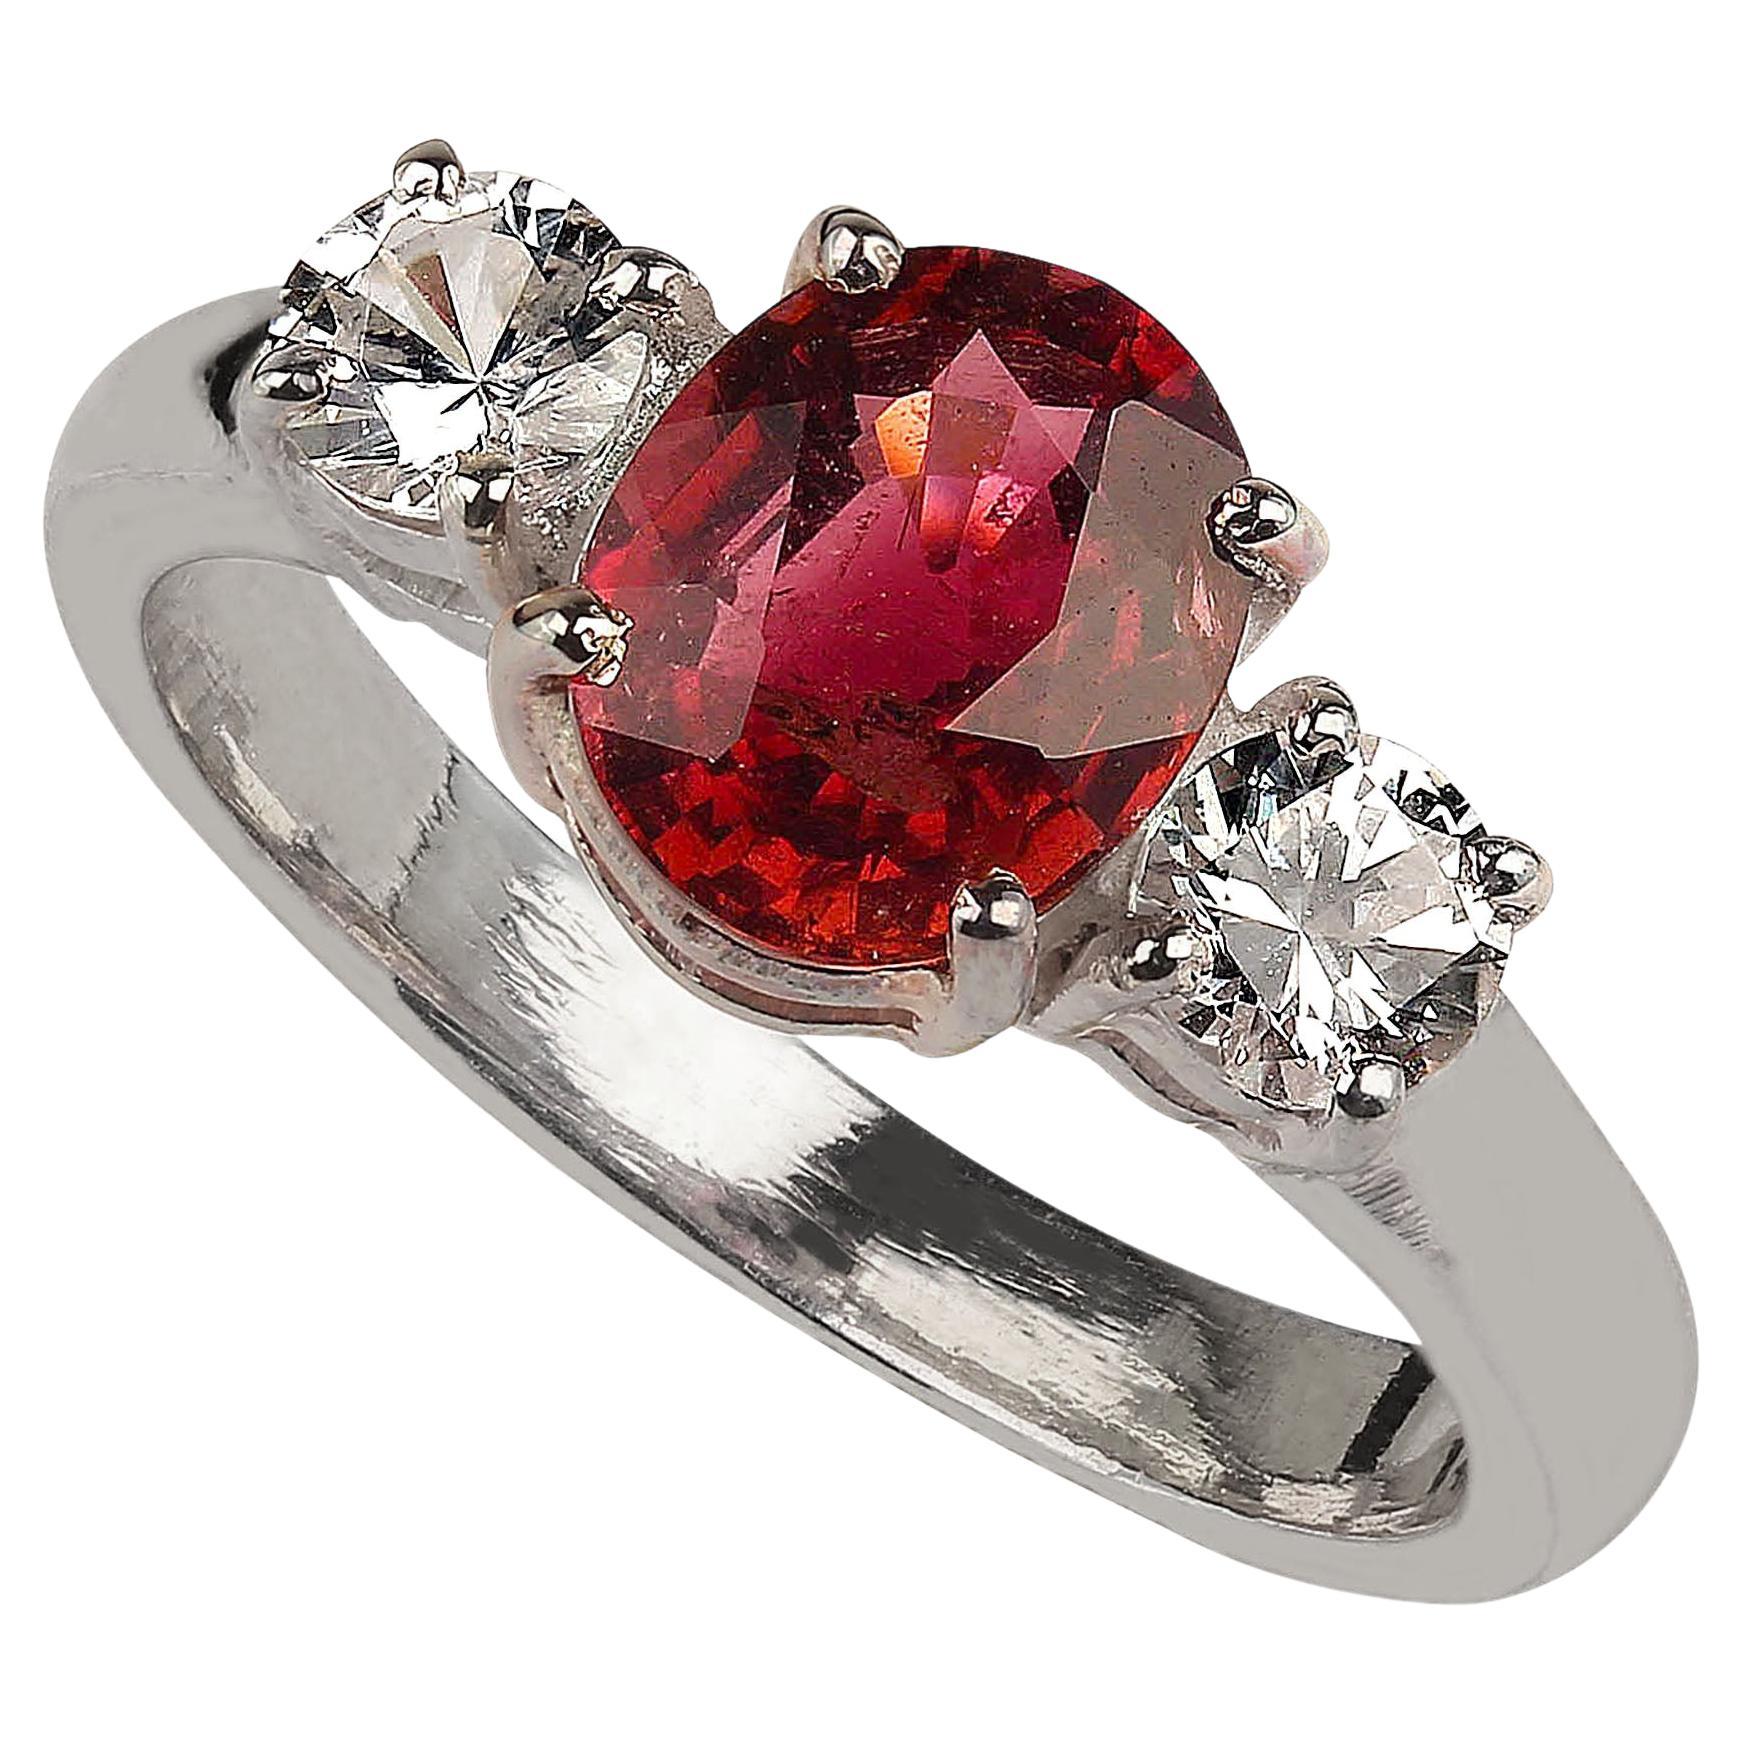 Delightful dinner ring of sparkling red tourmaline accented with genuine real Zircons.  This Sterling Silver sizable 7 ring is perfect for morning right through into the evening.  The oval red Tourmaline is 1.71cts and the genuine real Zircons, 0.61